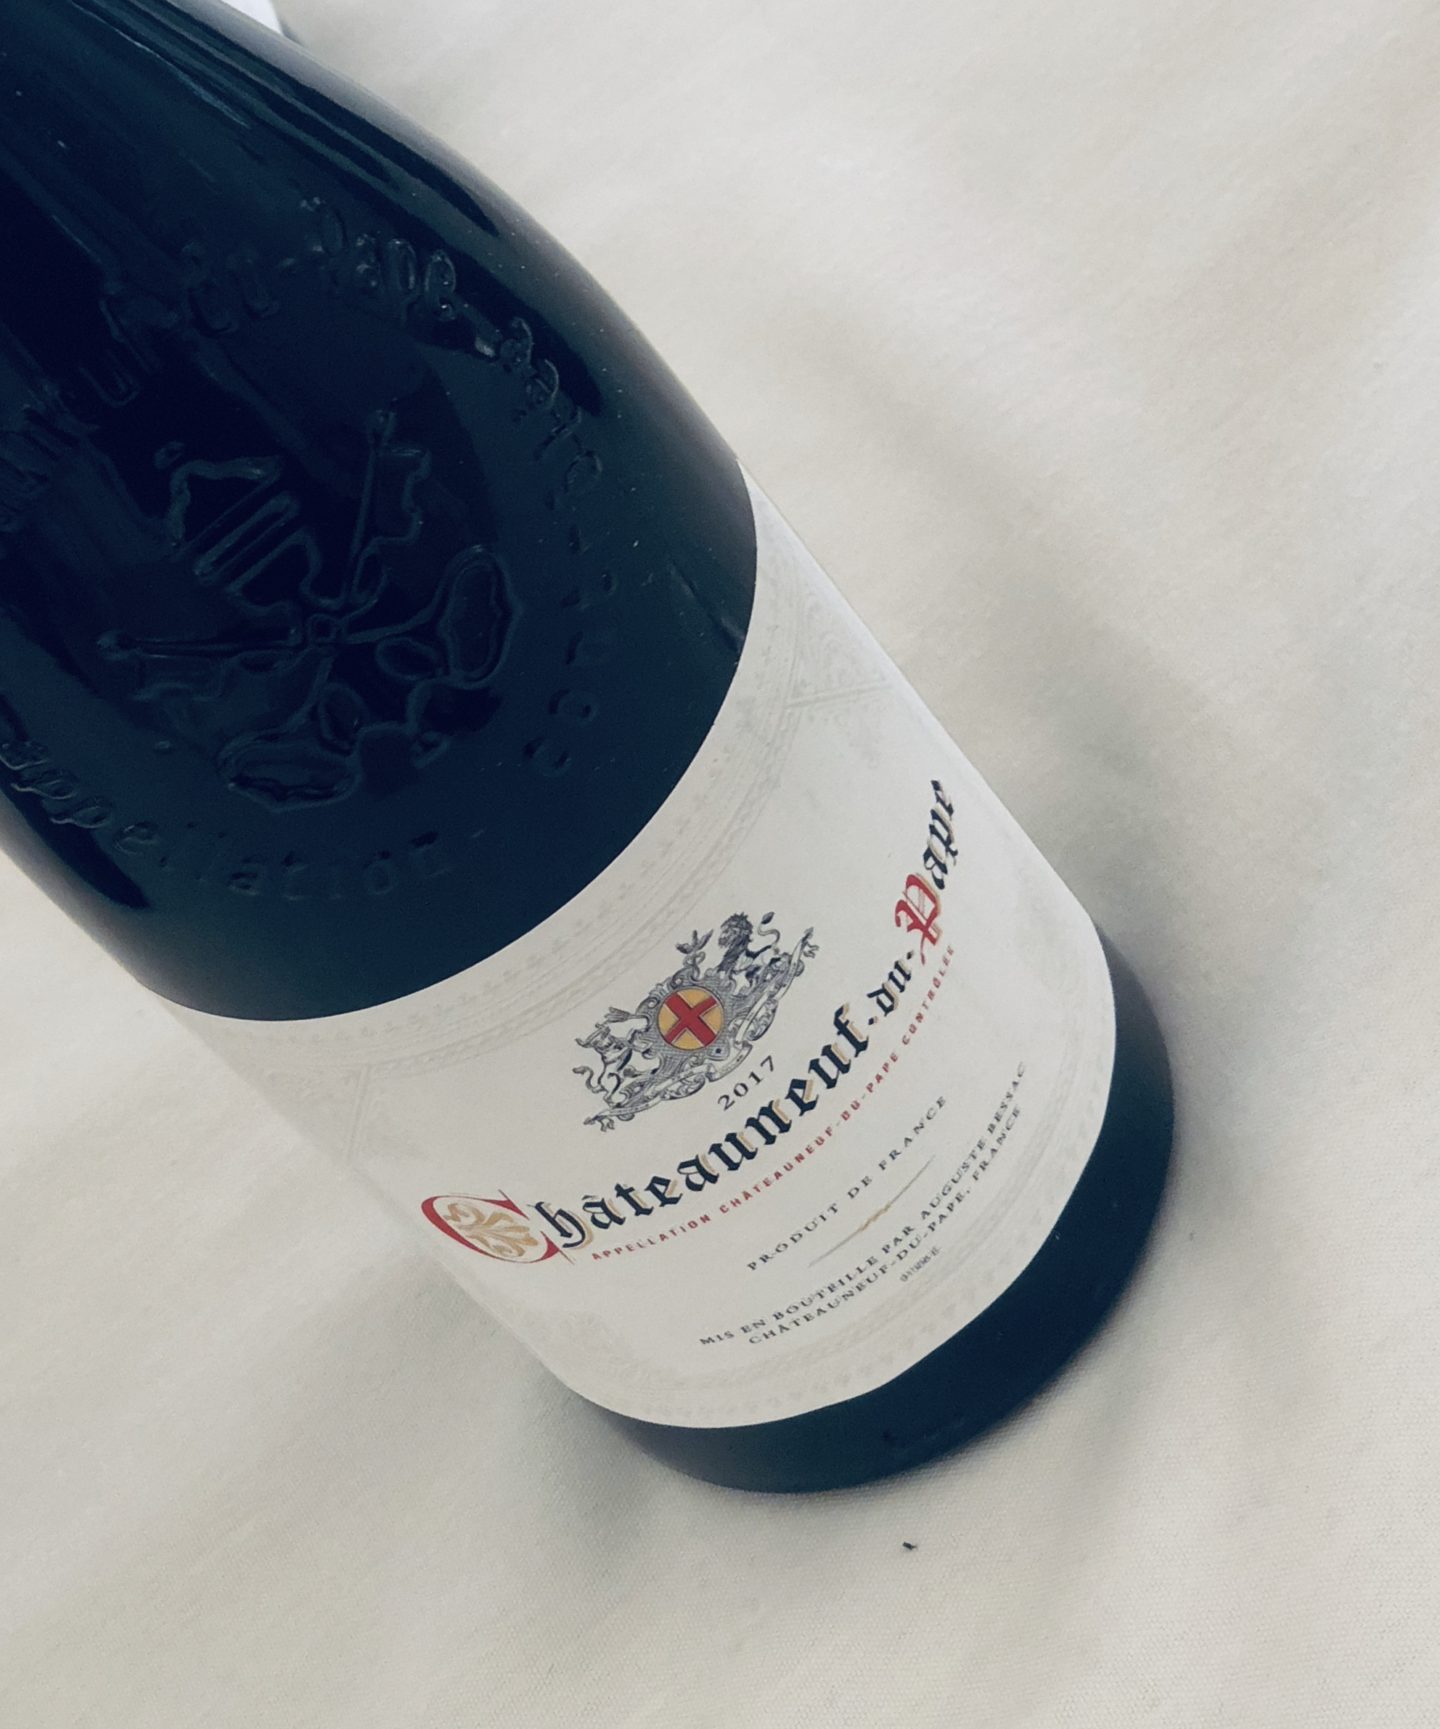 wines for winter with Asda : Chateauneuf-du-Pape